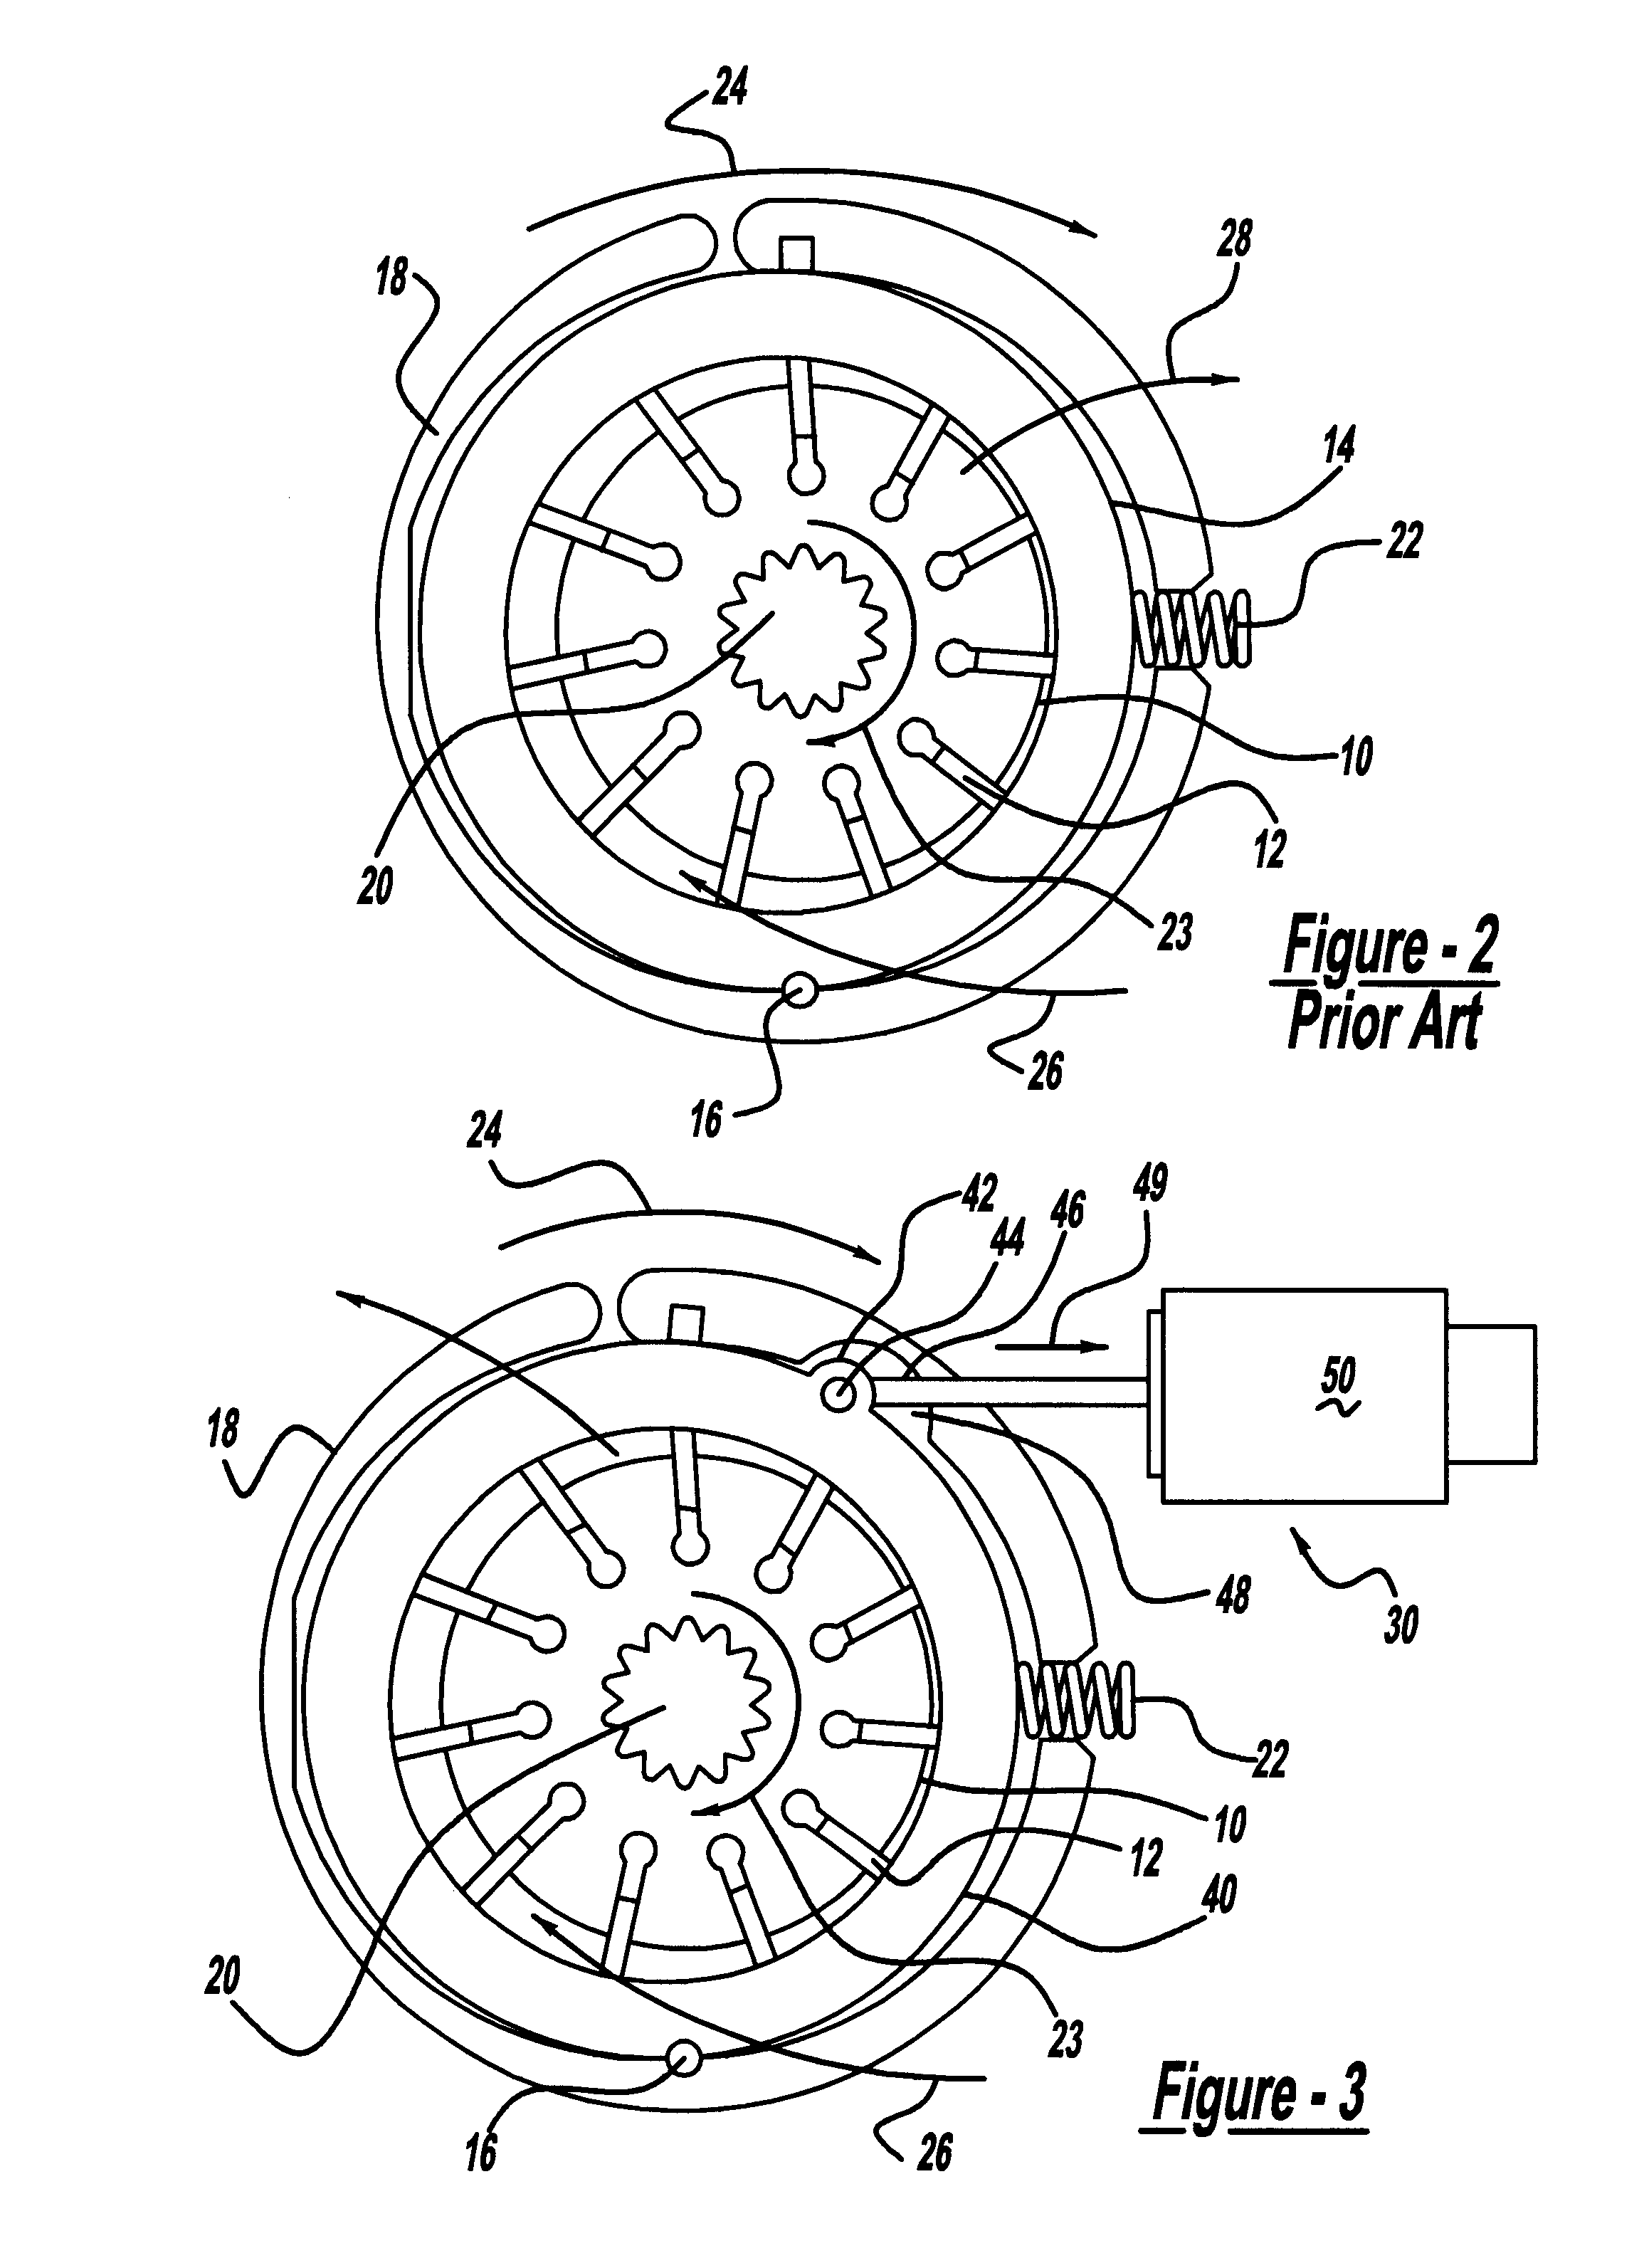 Auxiliary solenoid controlled variable displacement power steering pump